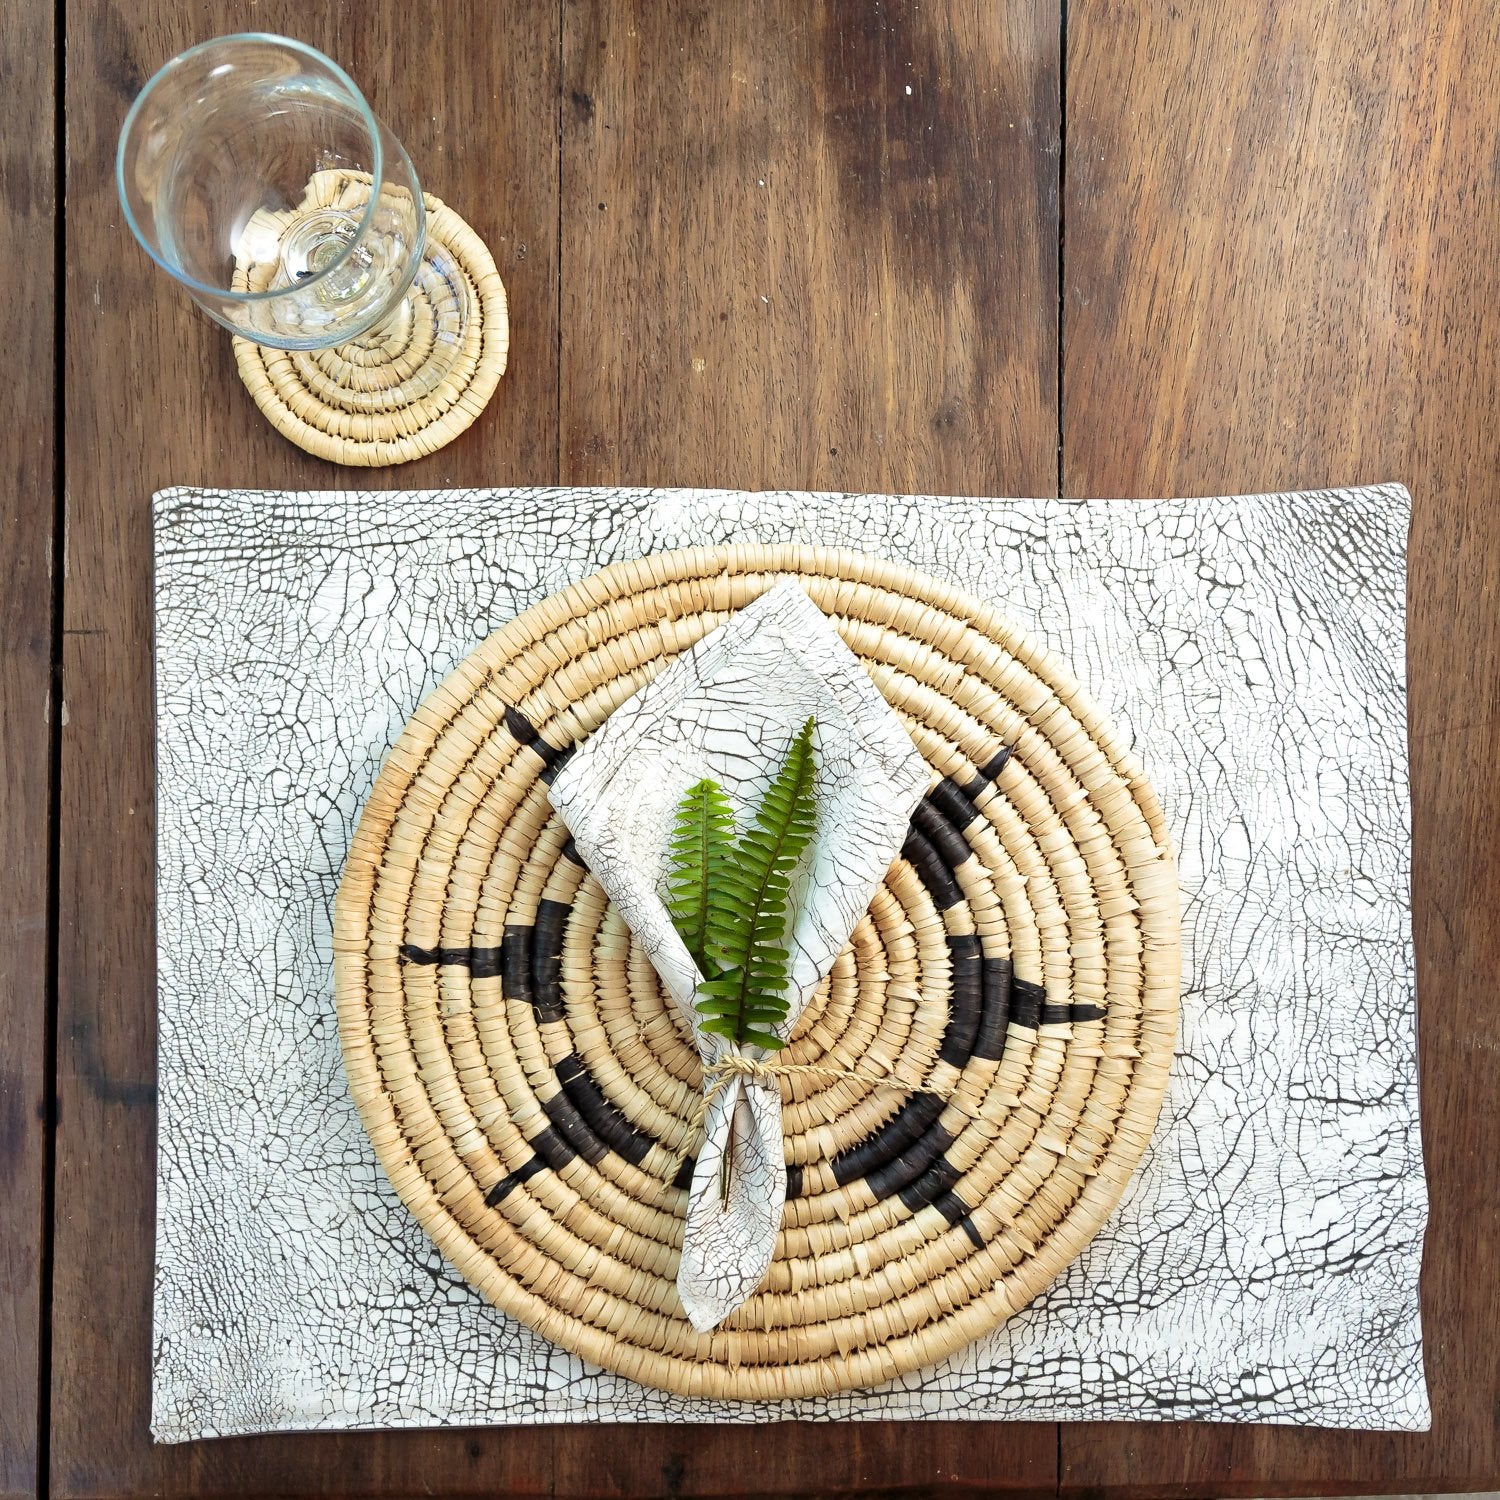 Woven Placemat with Patterns